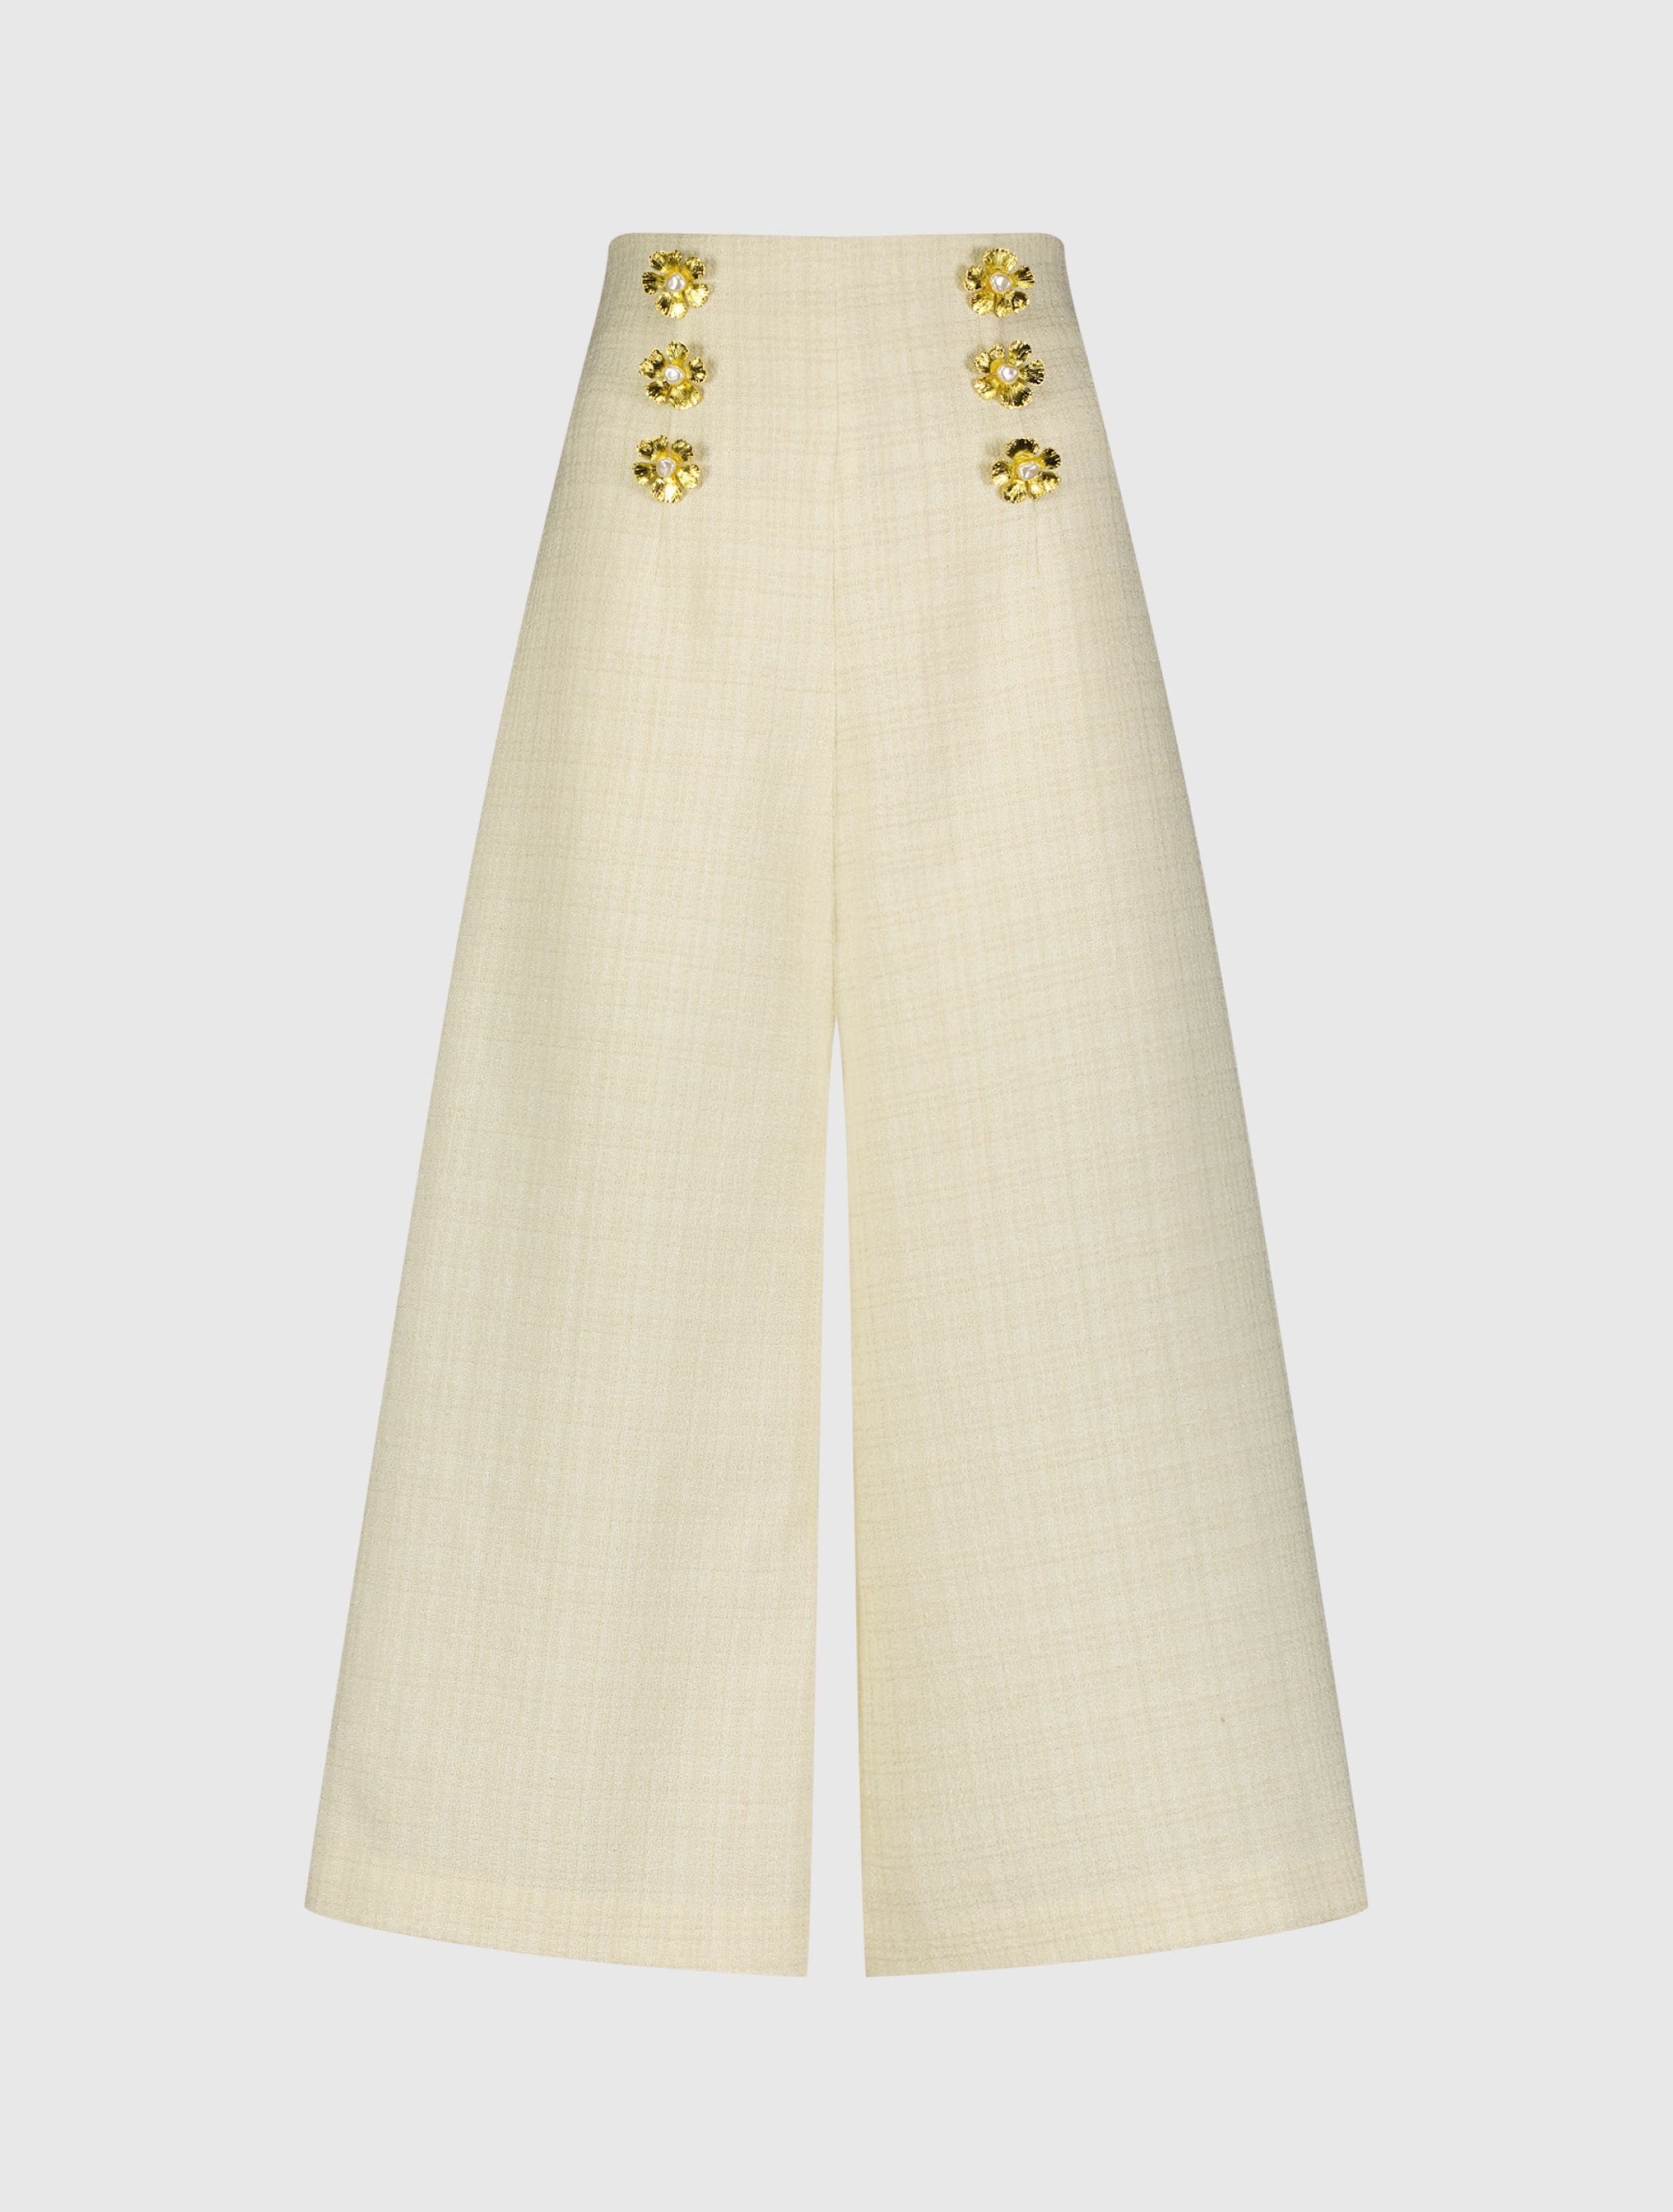 Ivory Tweed High Waisted Wide Leg Sailor Pant with Gold Buttons